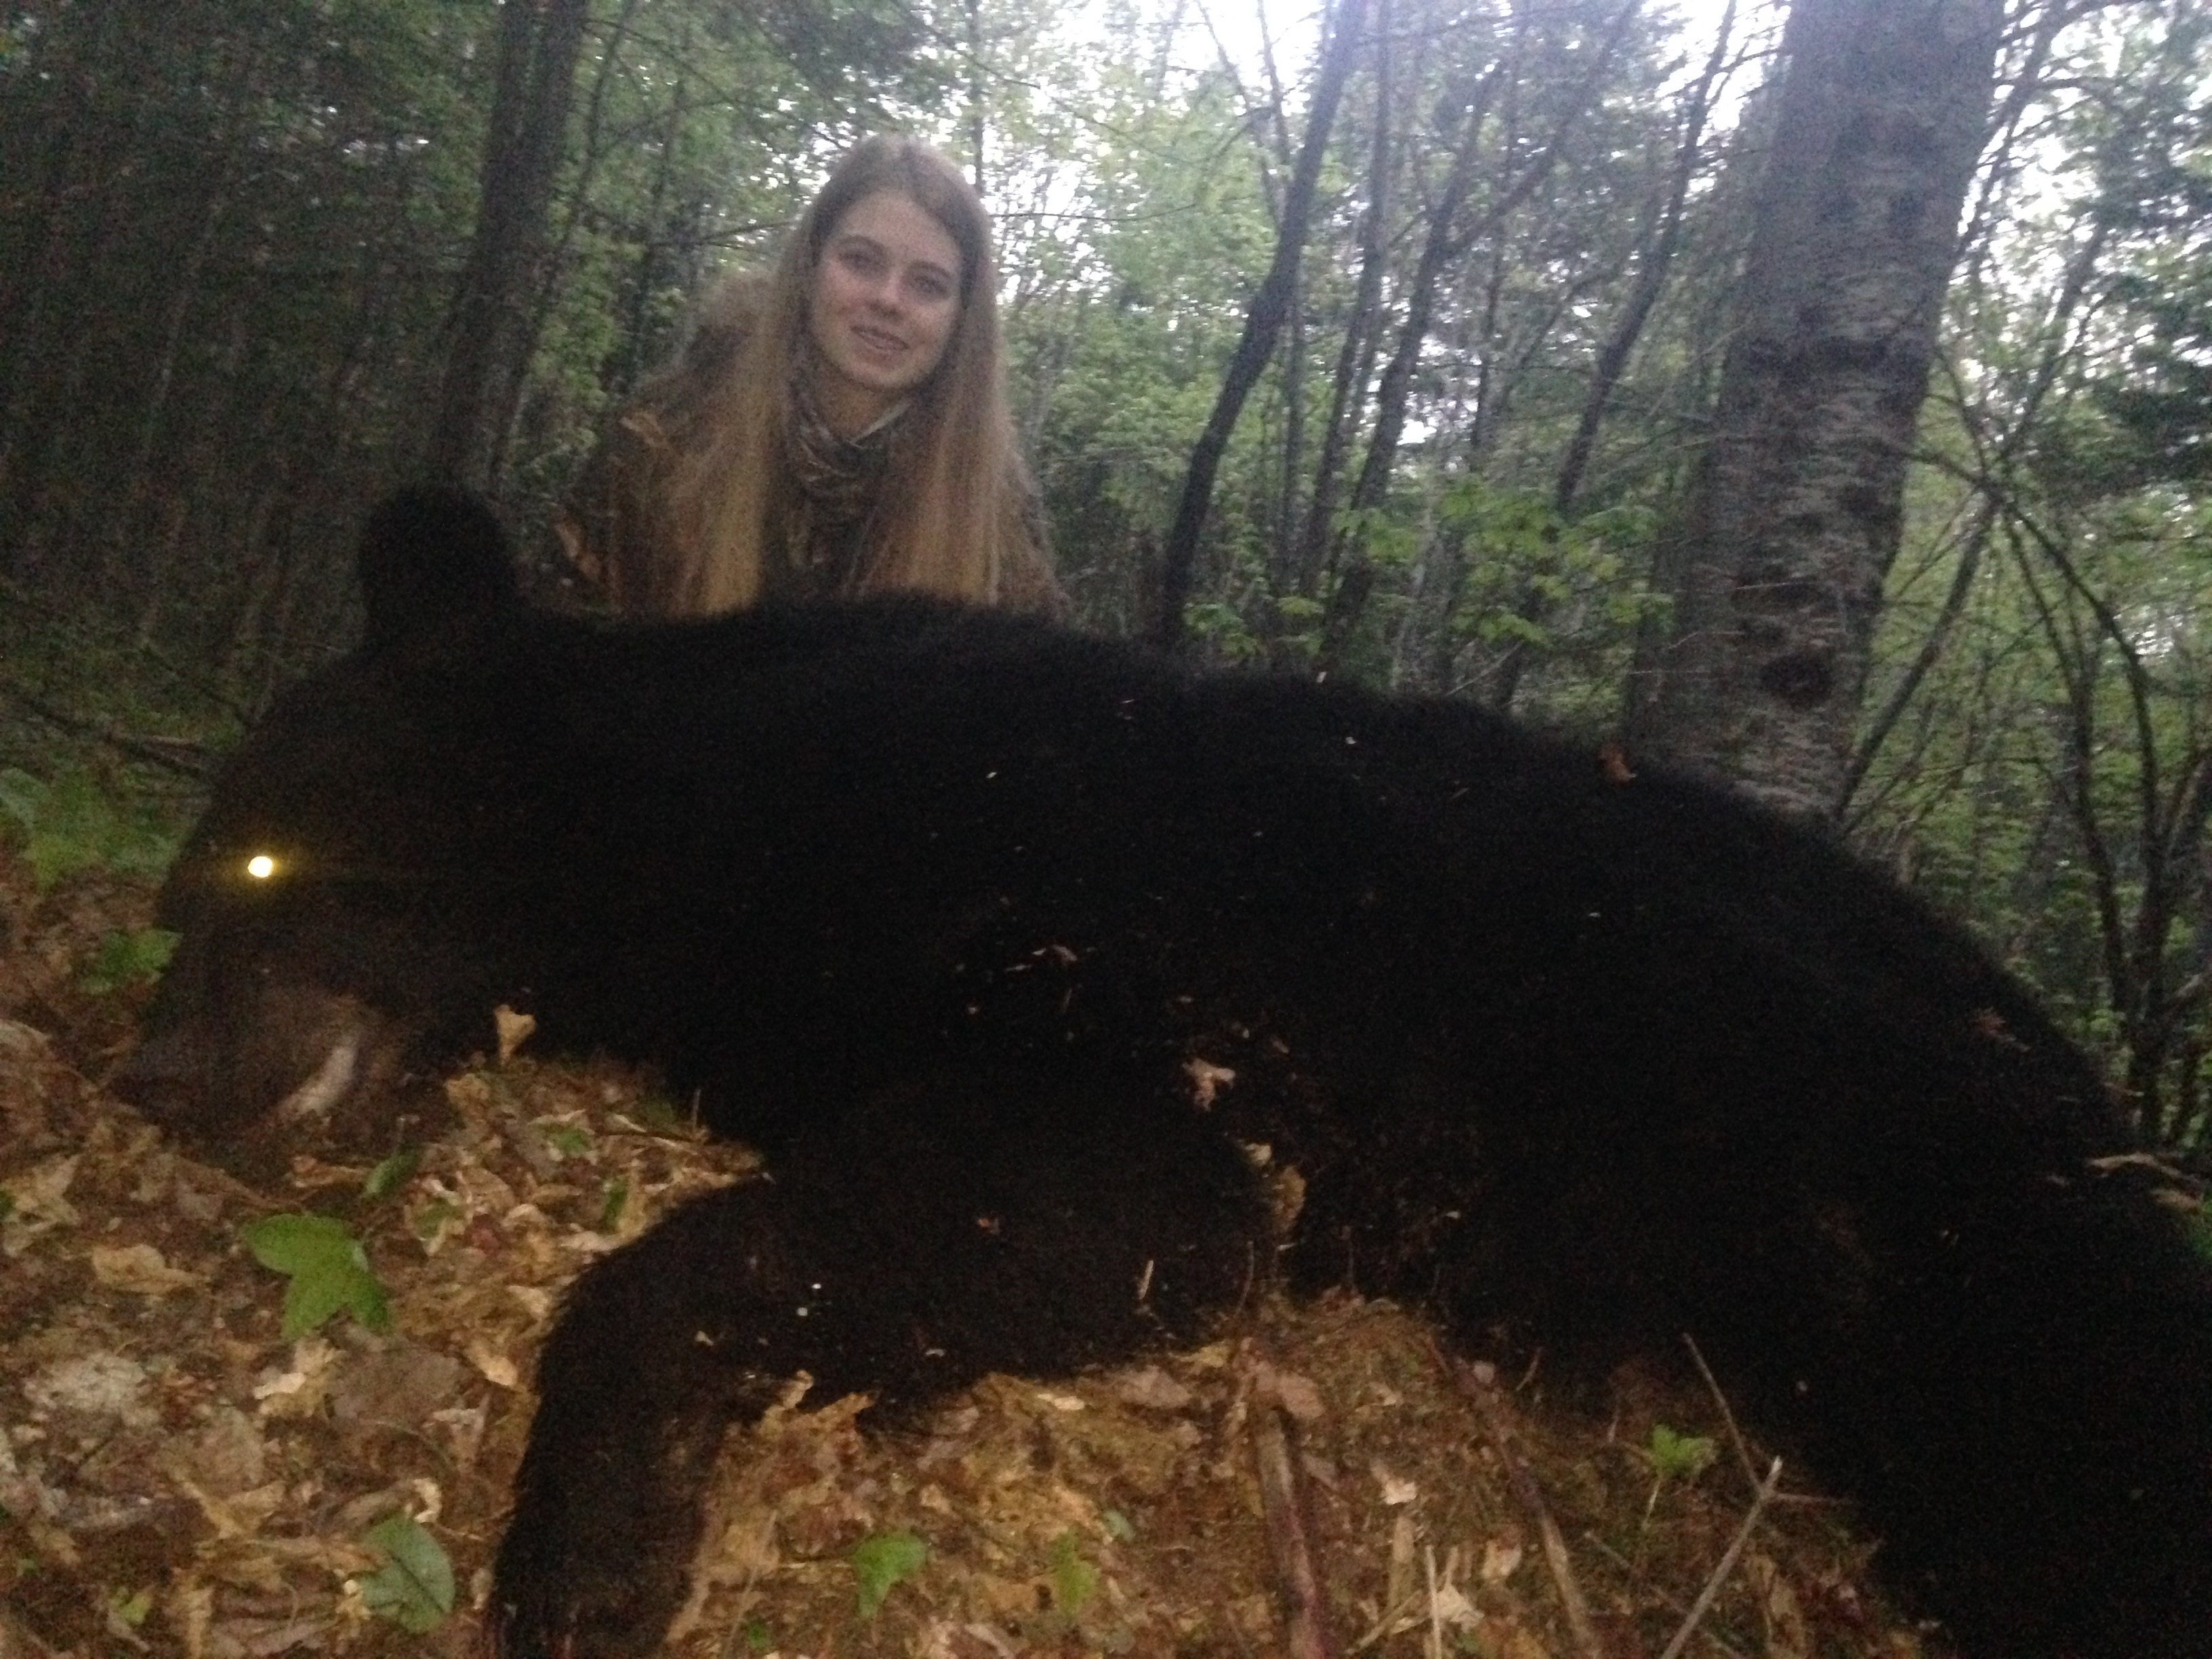 Jose with her first bear